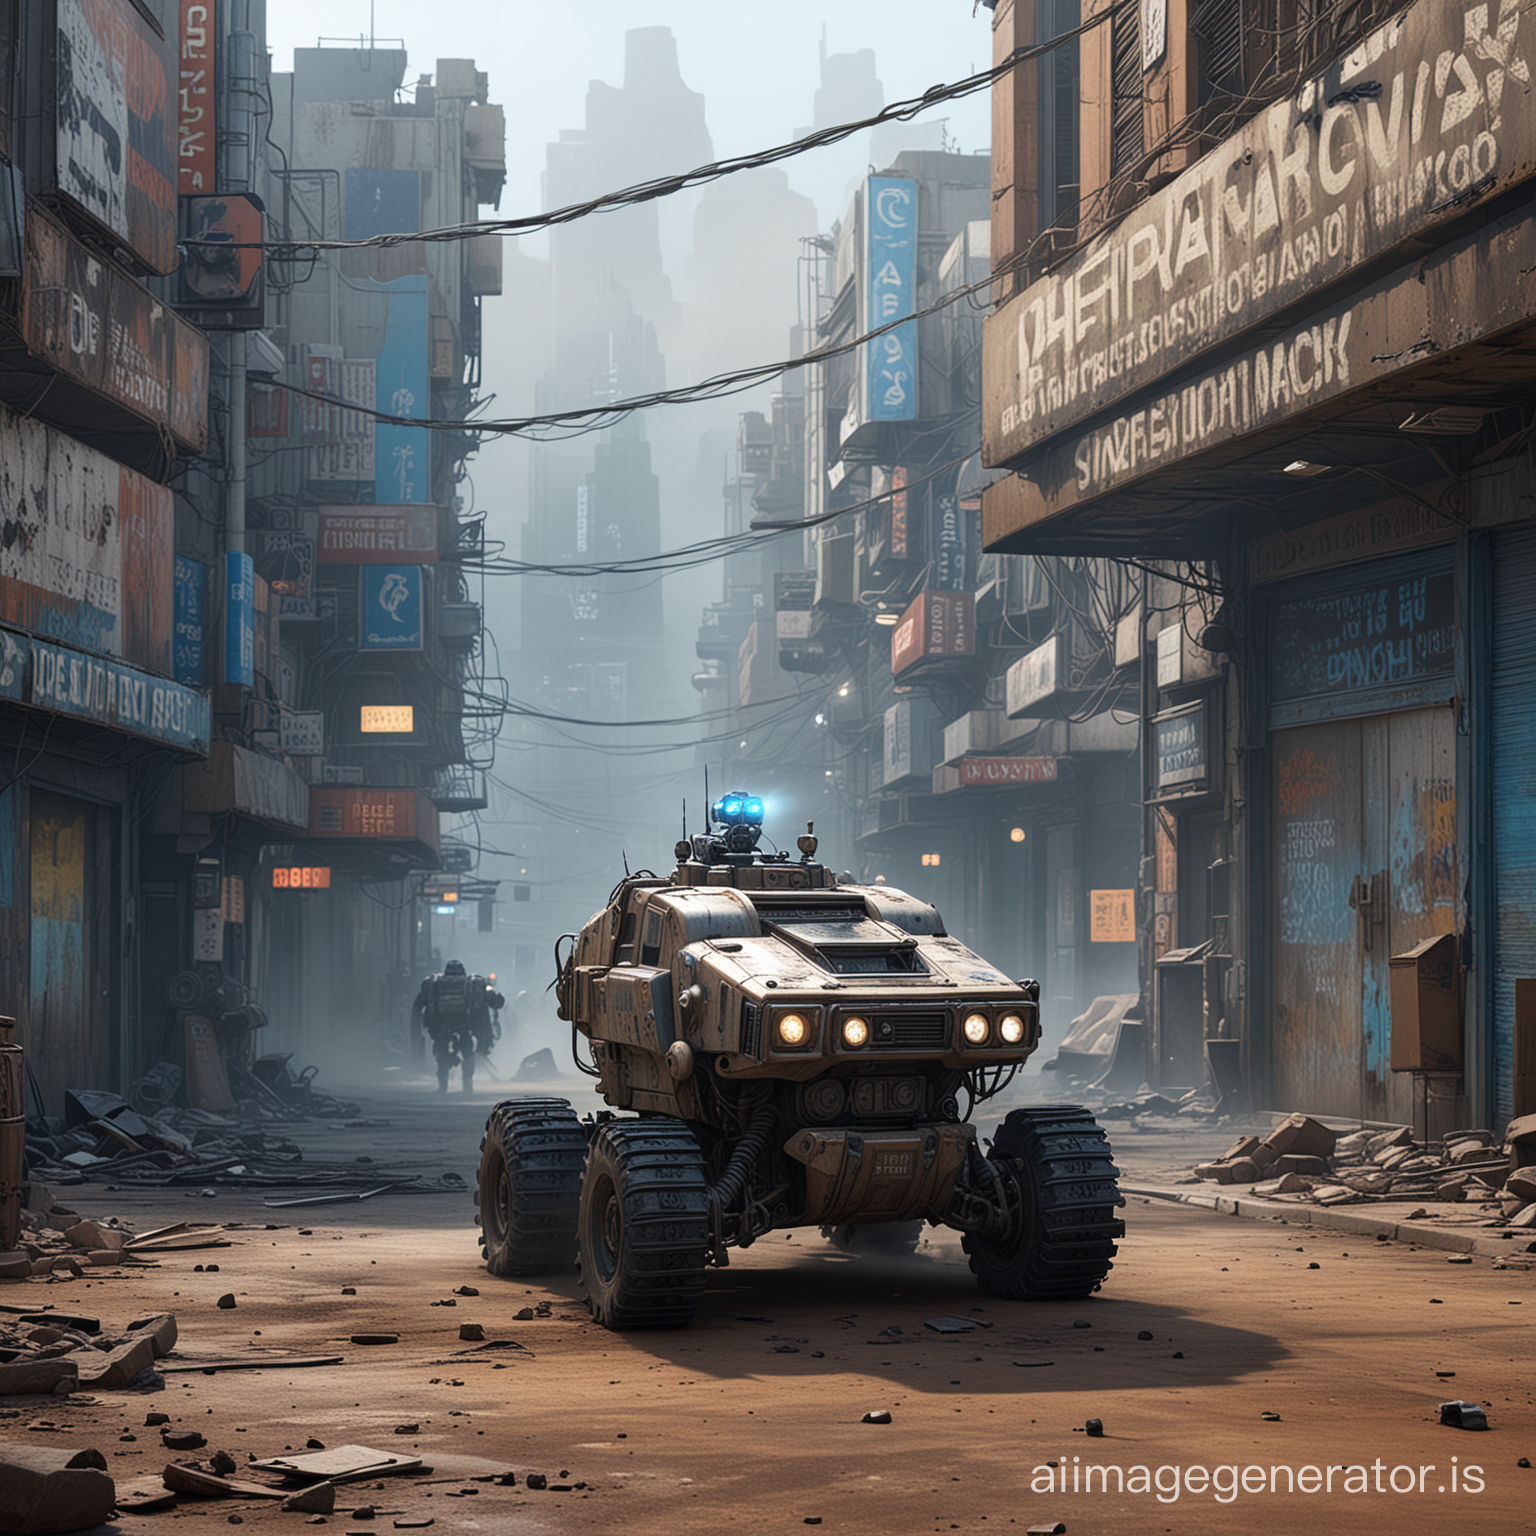 A detailed complex mechanical futuristic sci-fi 3D render of the short-circuit robot covered by dirt painting the phrase "There's No Fate But What We Make" on an old rusty white store sign, surrounded by smoke and dust effects, with a cyberpunk dystopian city in the background, a cybercop car, night time, blue lighting billboards light the scene, white lights from the inside of the buildings, street photography, concept art, gaming art, high-res, high-quality.